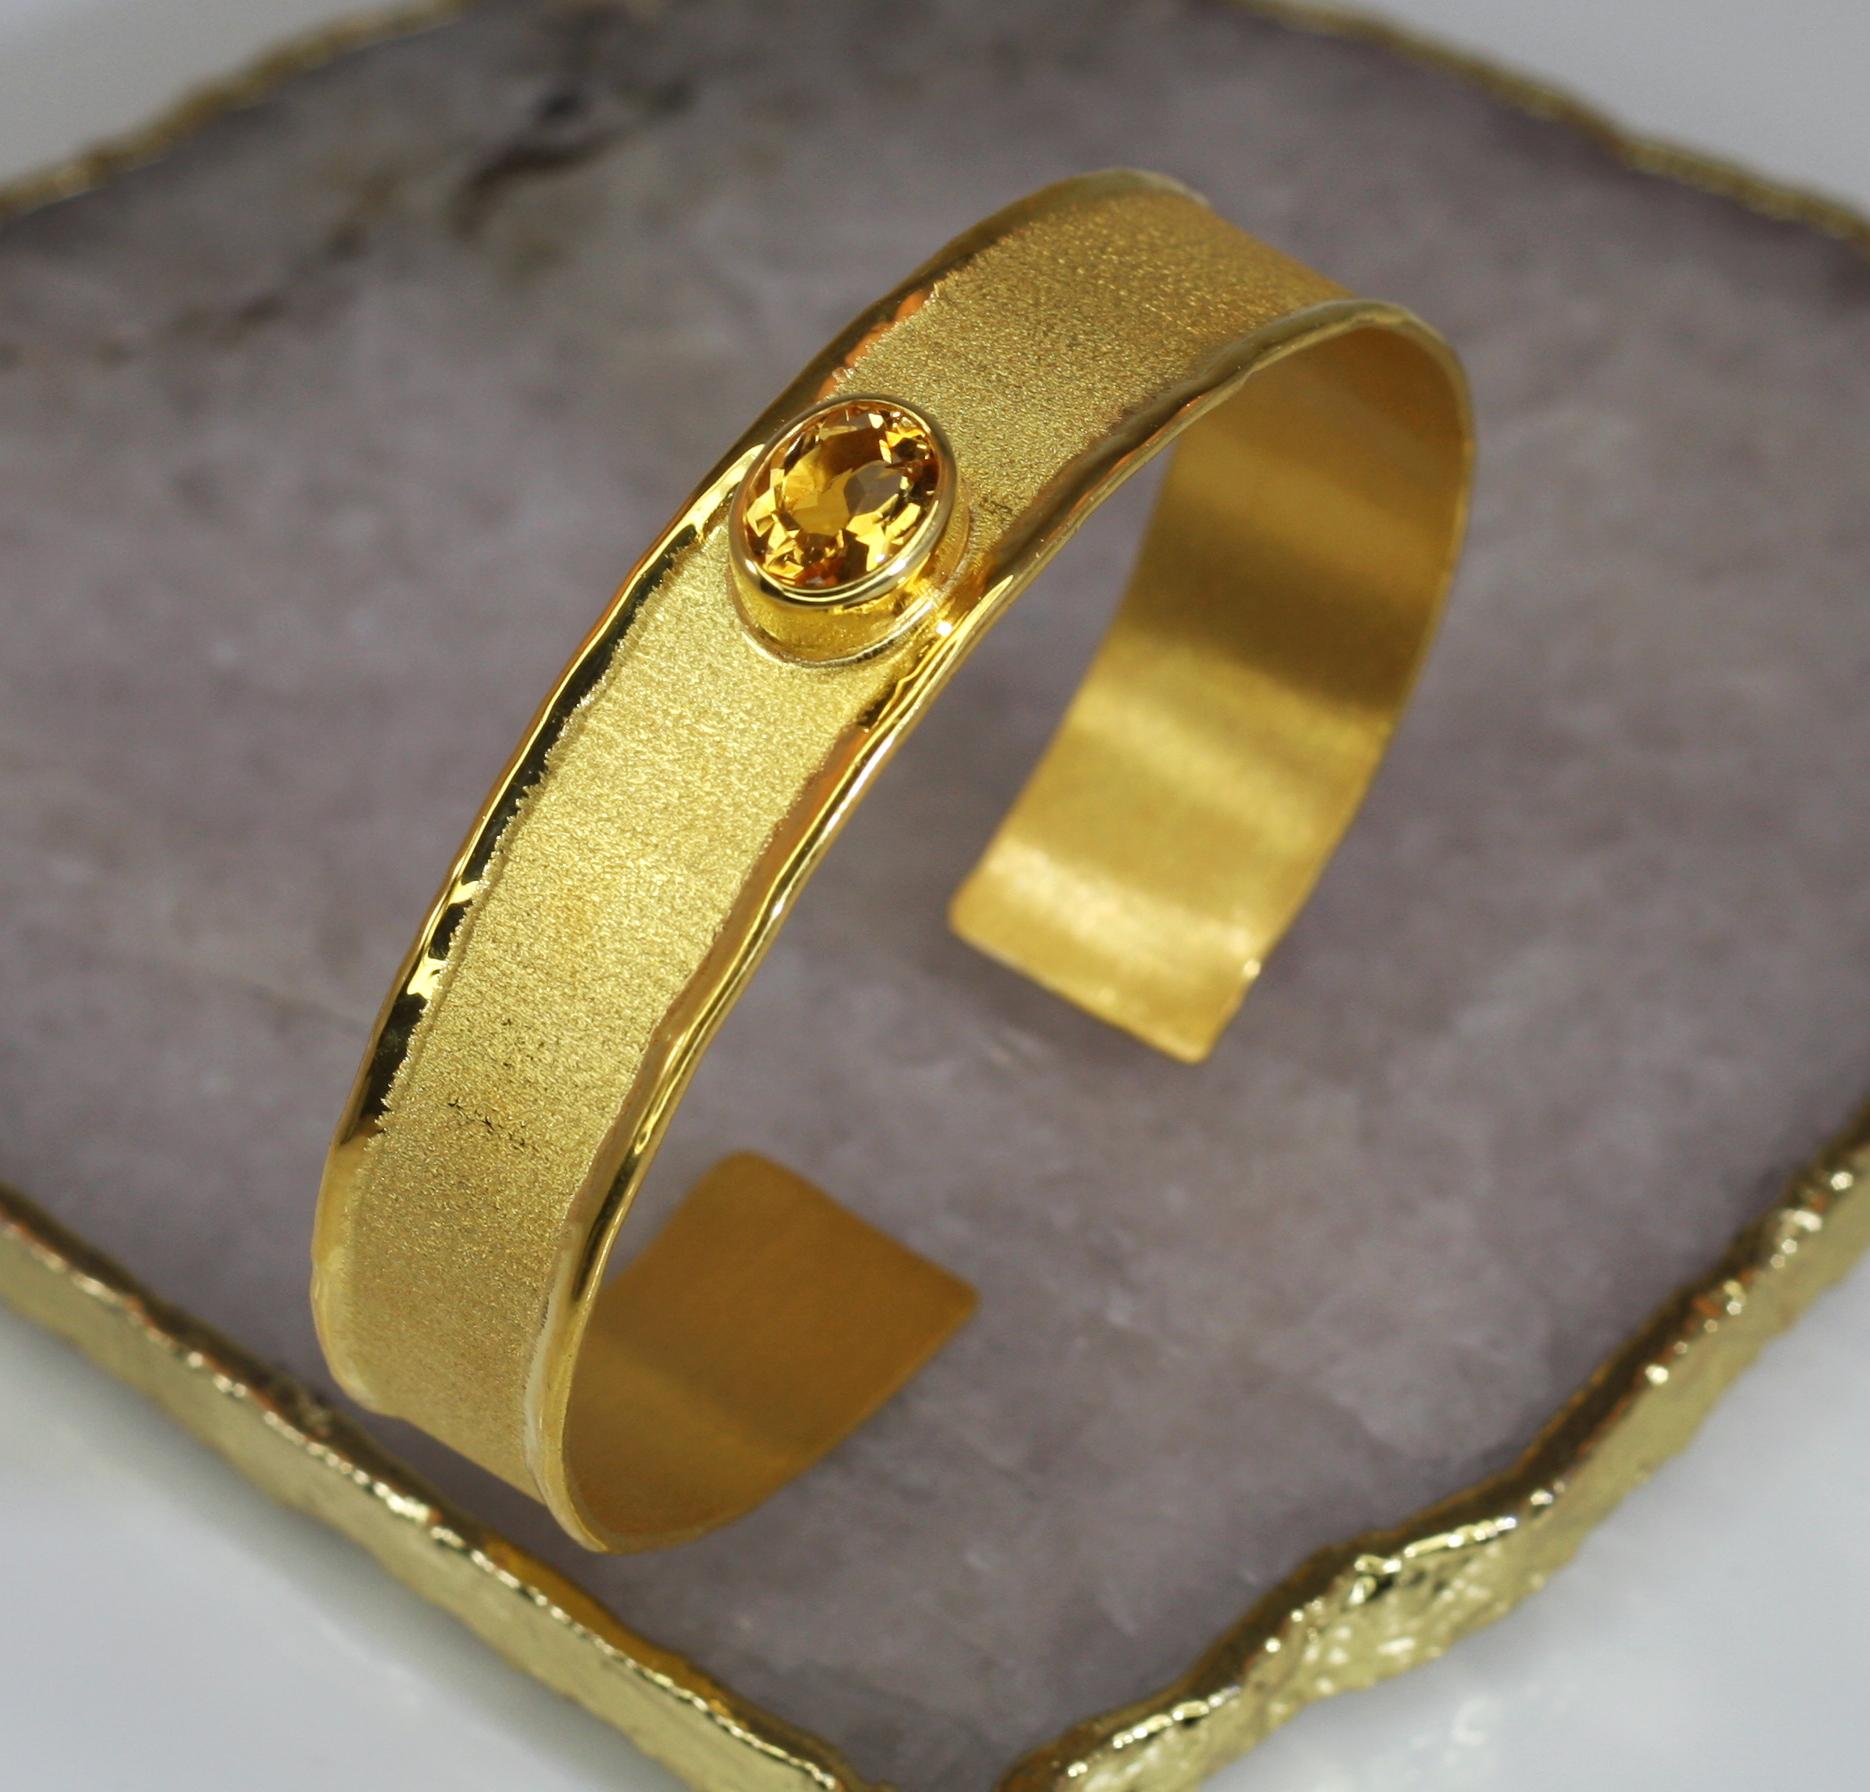 Yianni Creations 18 Karat Gold Bangle Bracelet with Citrine In New Condition For Sale In Astoria, NY